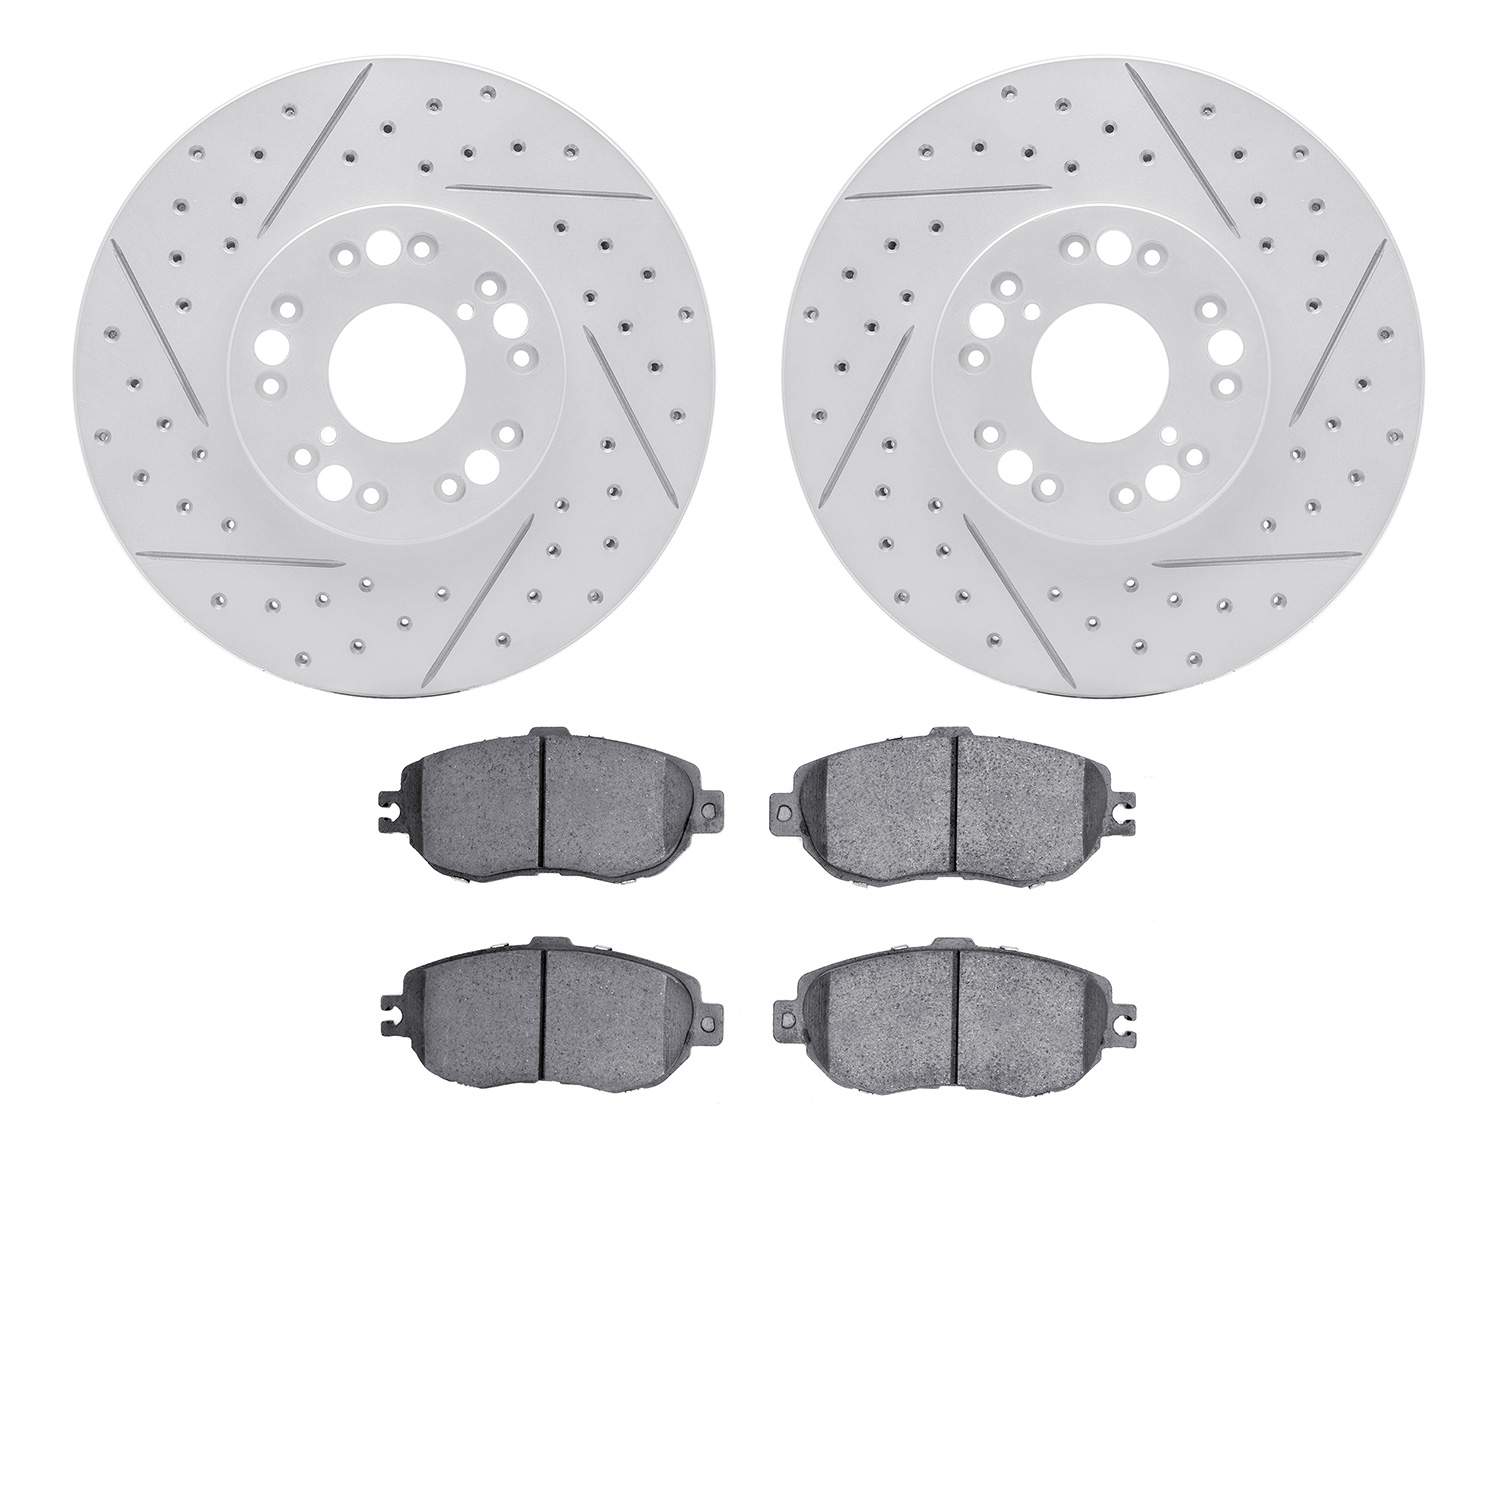 2502-75001 Geoperformance Drilled/Slotted Rotors w/5000 Advanced Brake Pads Kit, 1993-1994 Lexus/Toyota/Scion, Position: Front